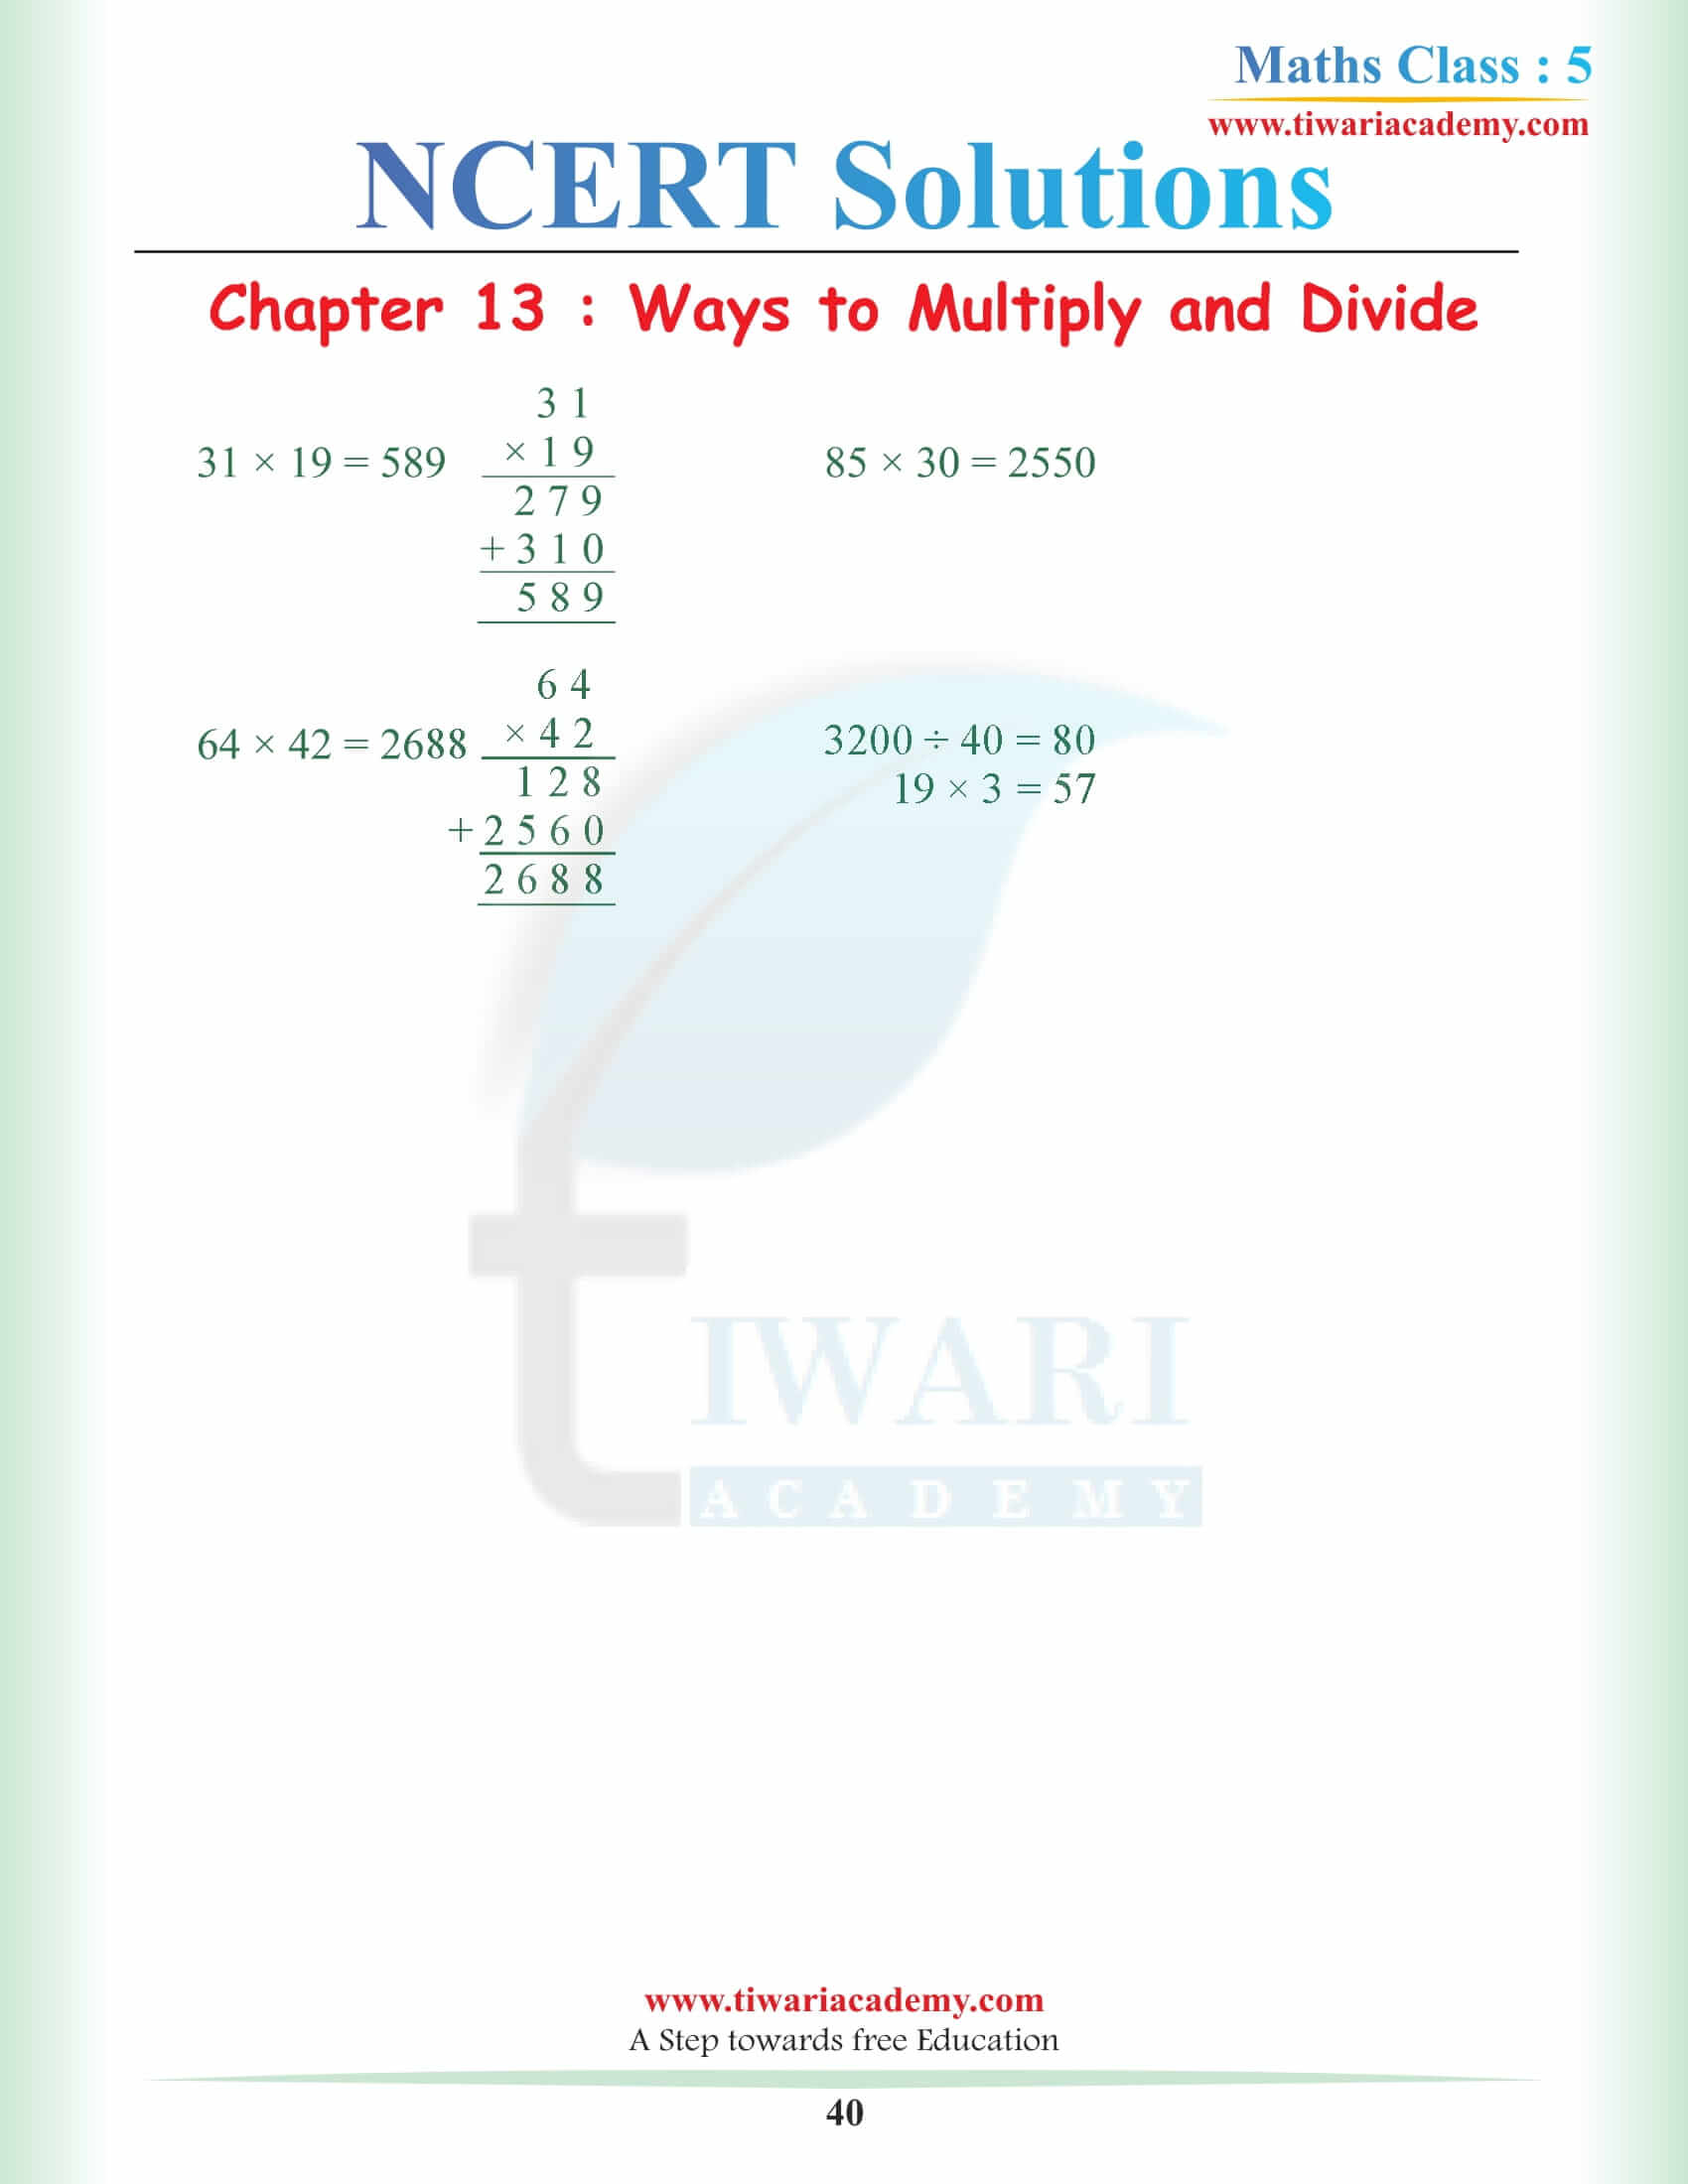 5th Math Chapter 13 NCERT Solutions free